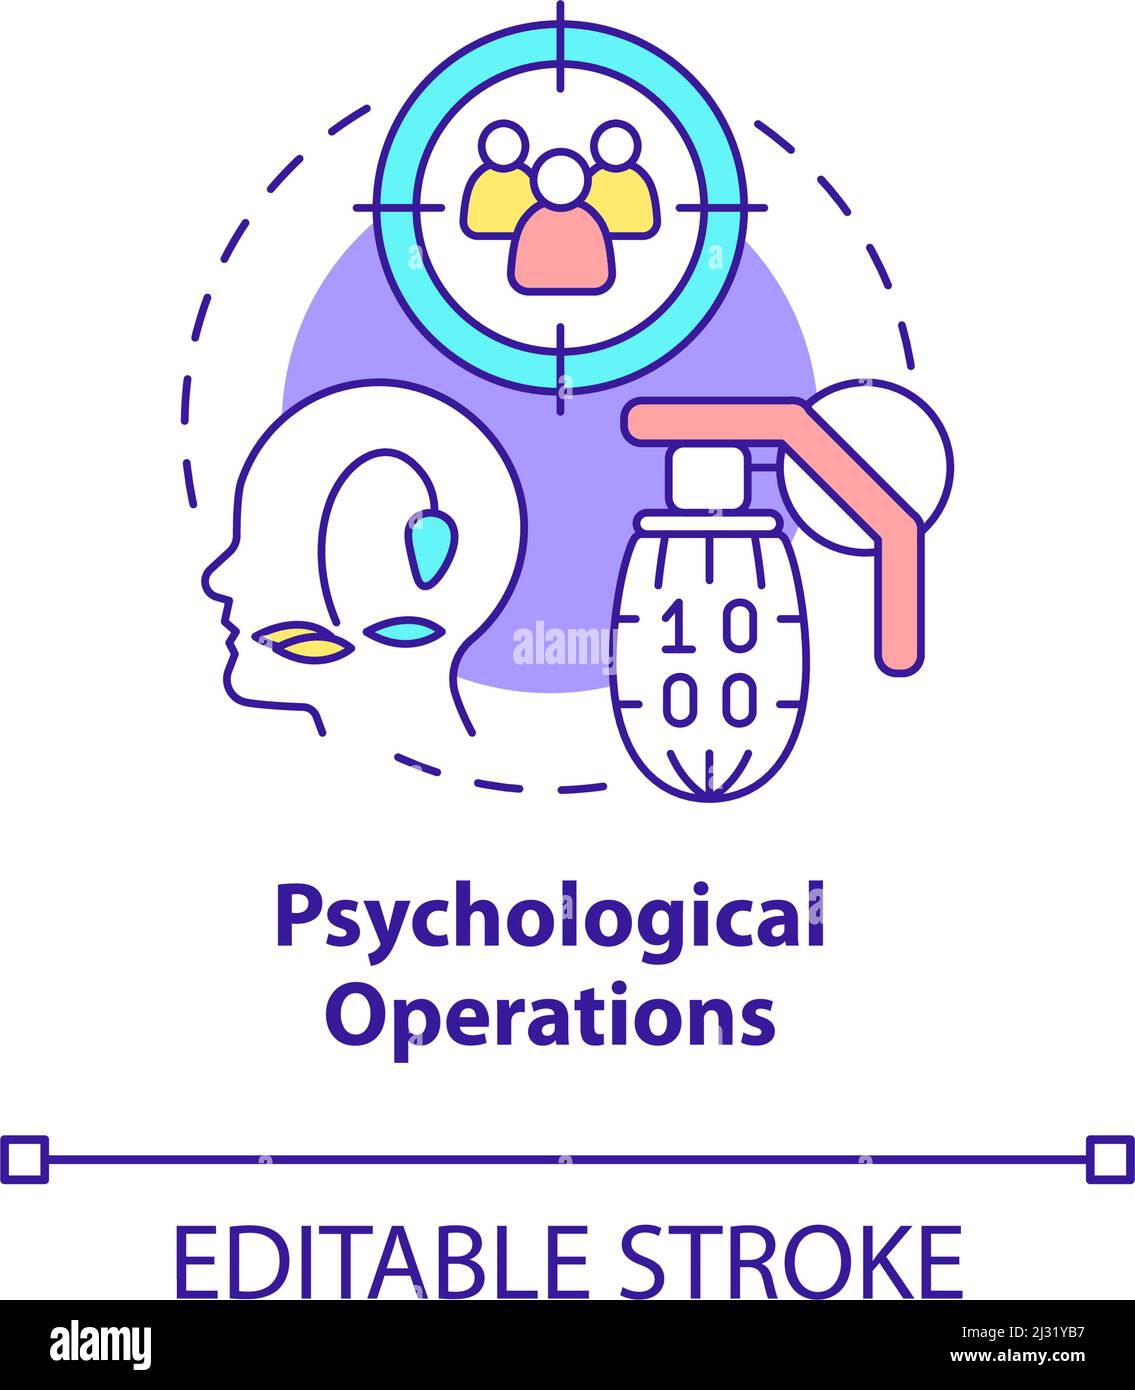 Psychological operations concept icon Stock Vector